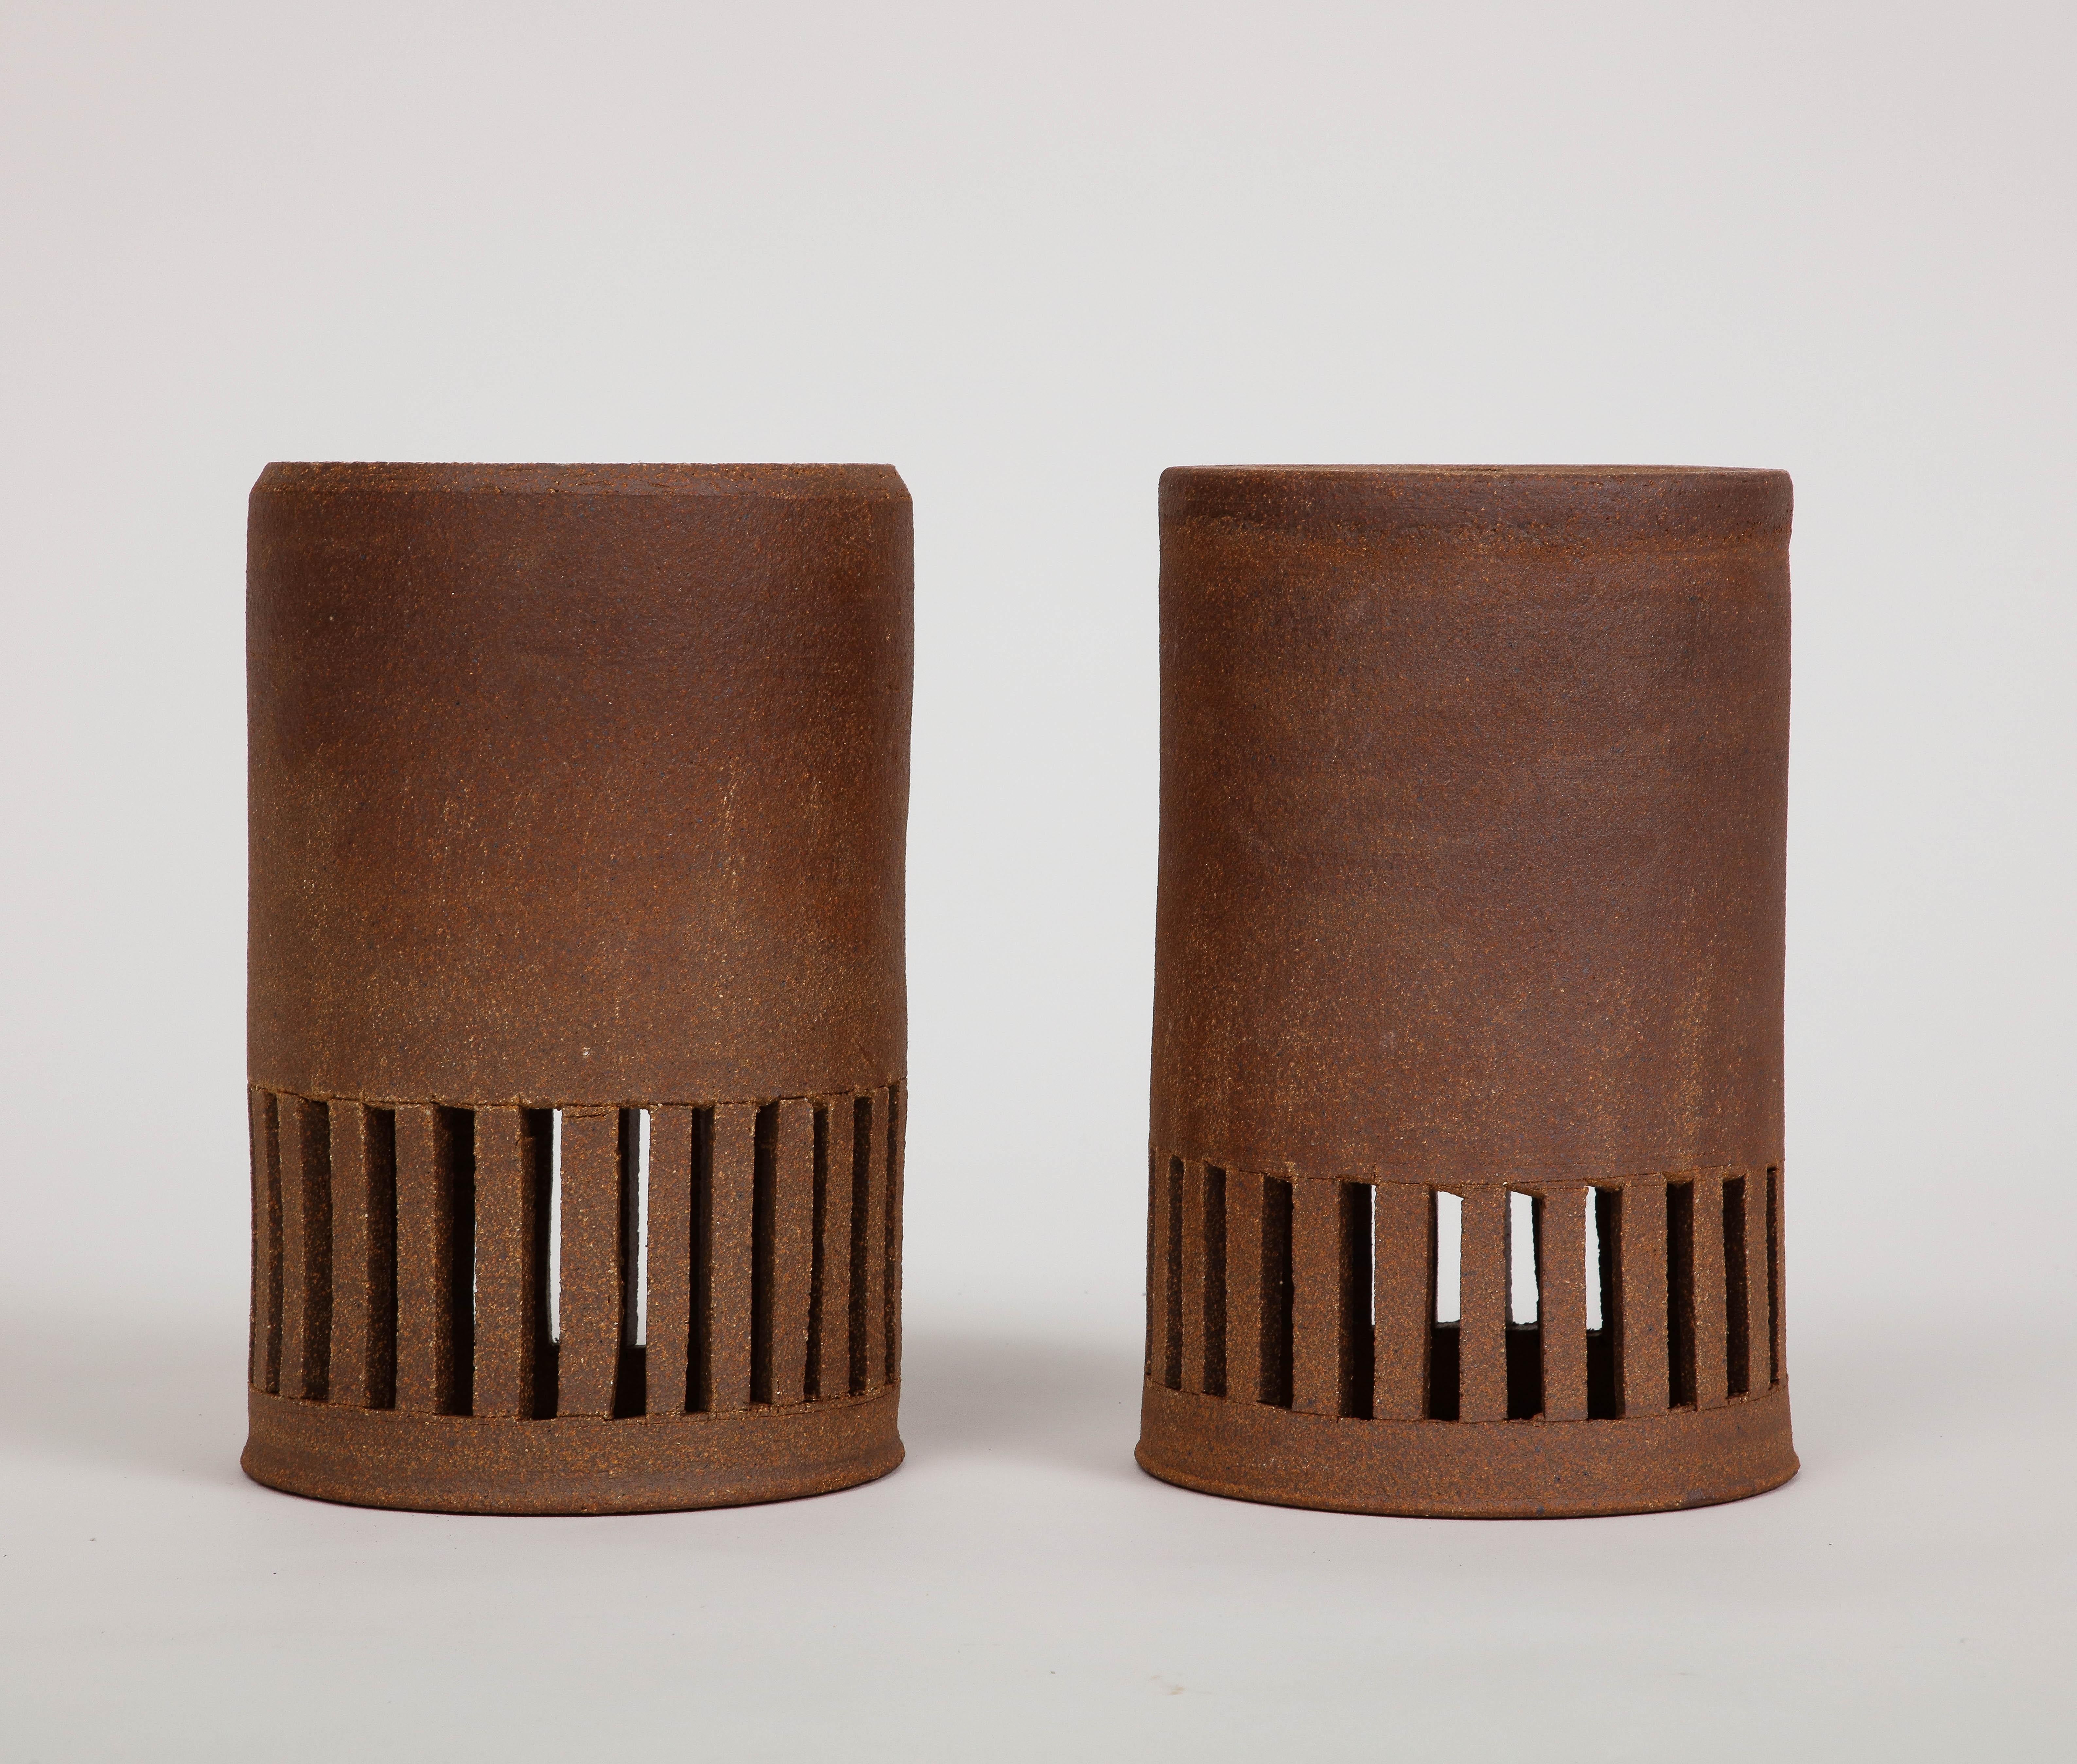 Pair of natural clay indoor/outdoor hanging cylindrical light shades by Brent J. Bennett, US. Made in 2022. 

*These are shades only, no lighting elements are included. Customize with your own cable/socket fitting!